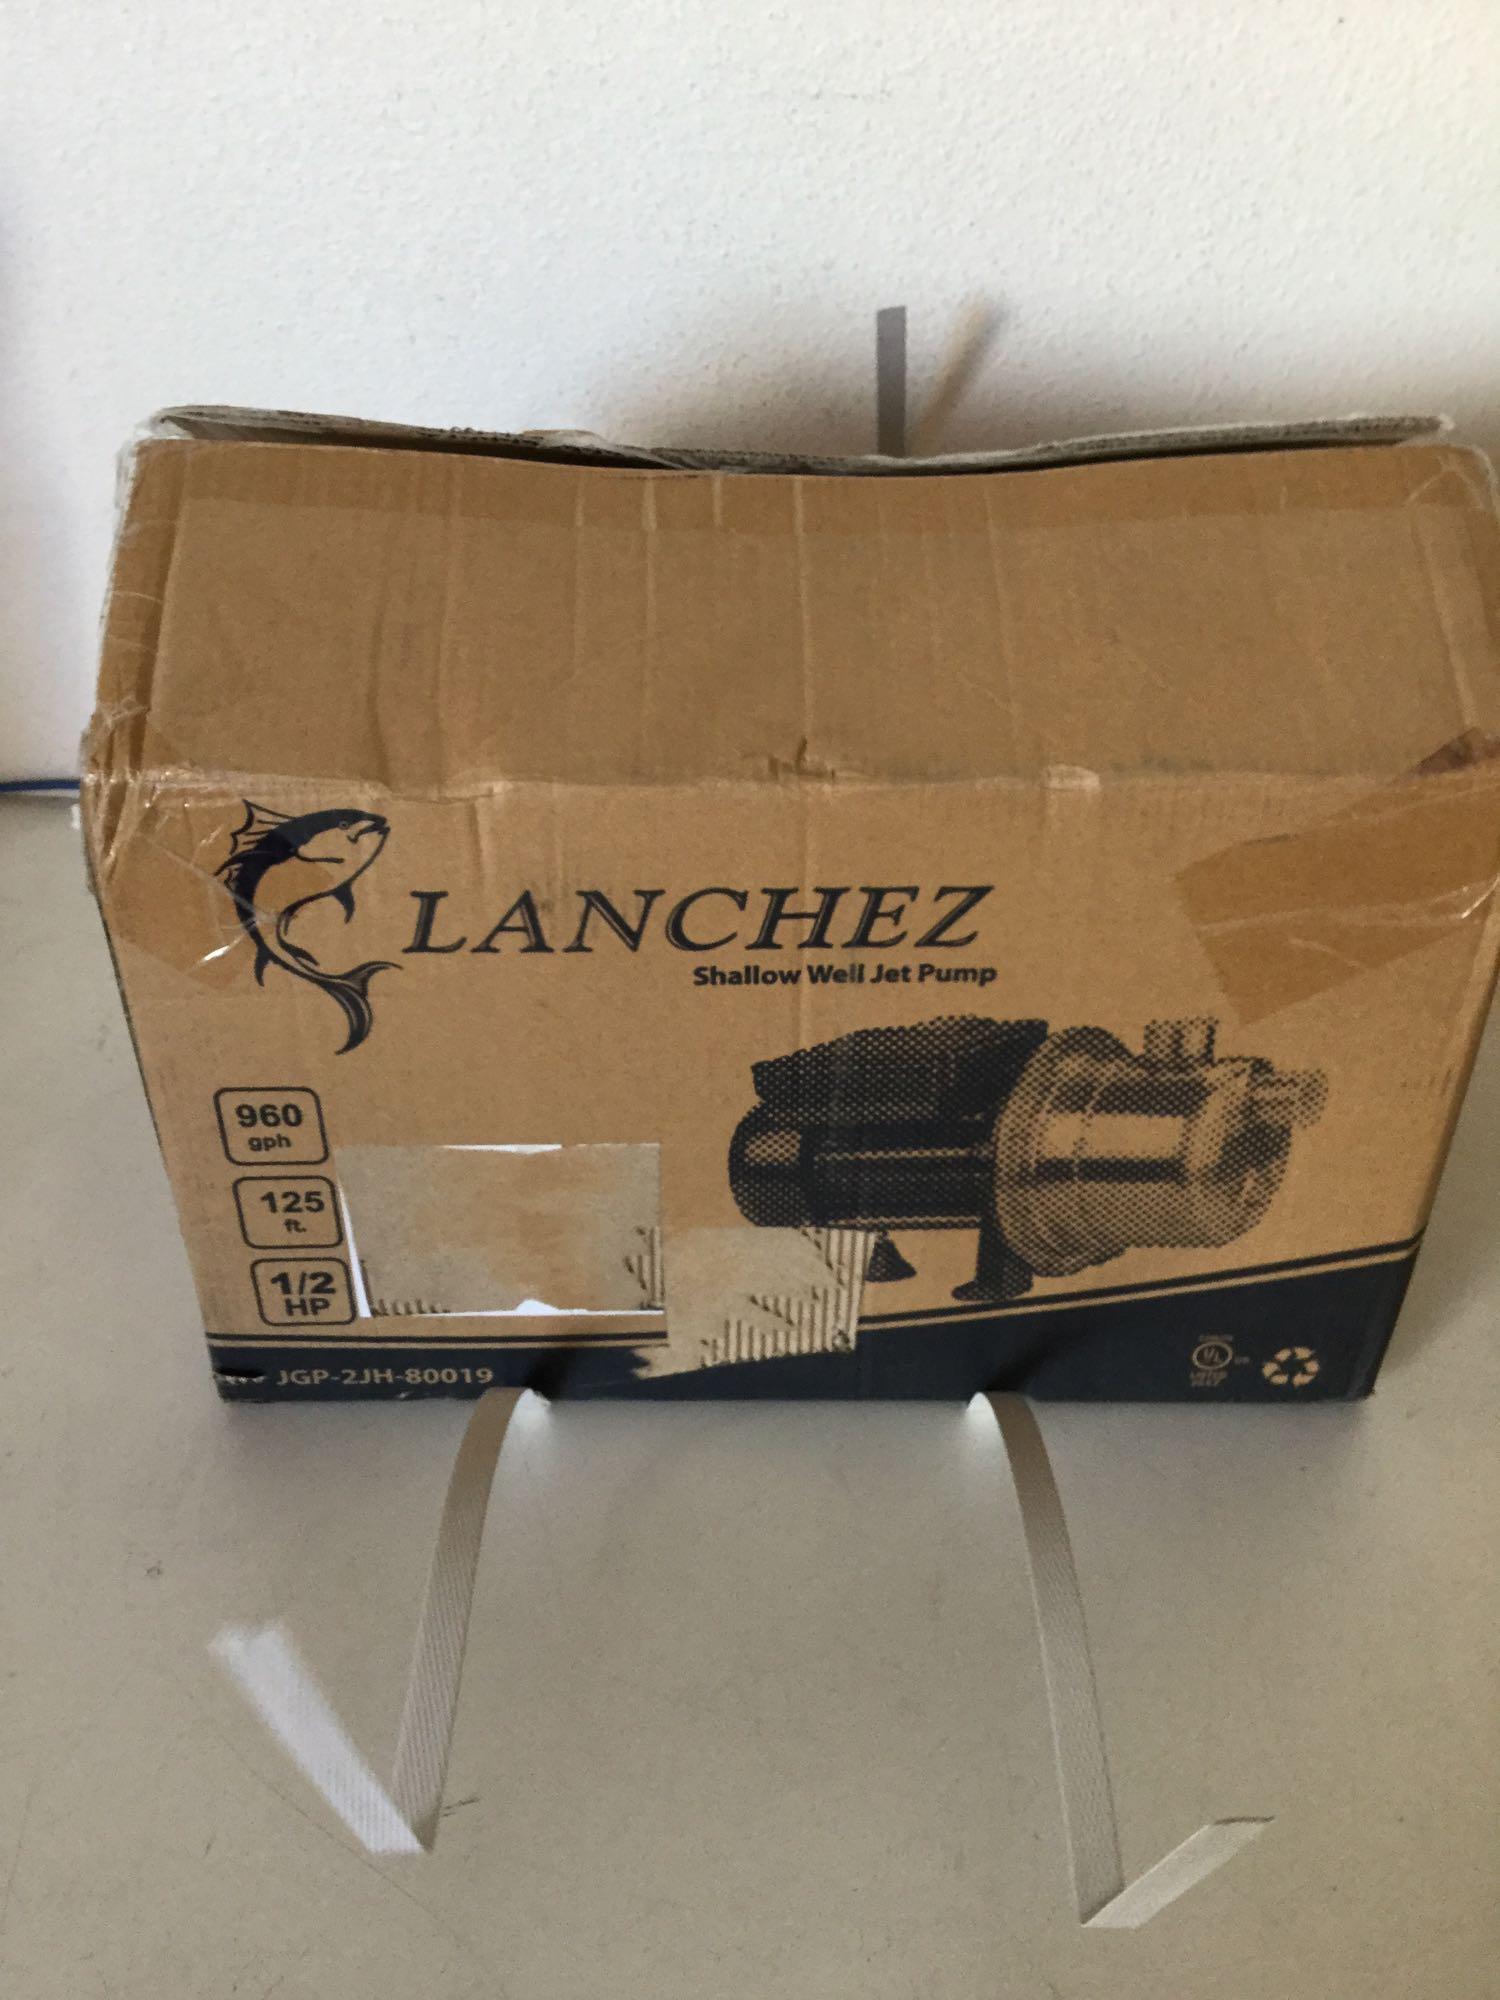 LANCHEZ 1/2 HP Shallow Well Jet Pump Stainless Steel Water Pump Transfer Removal $84.95 MSRP